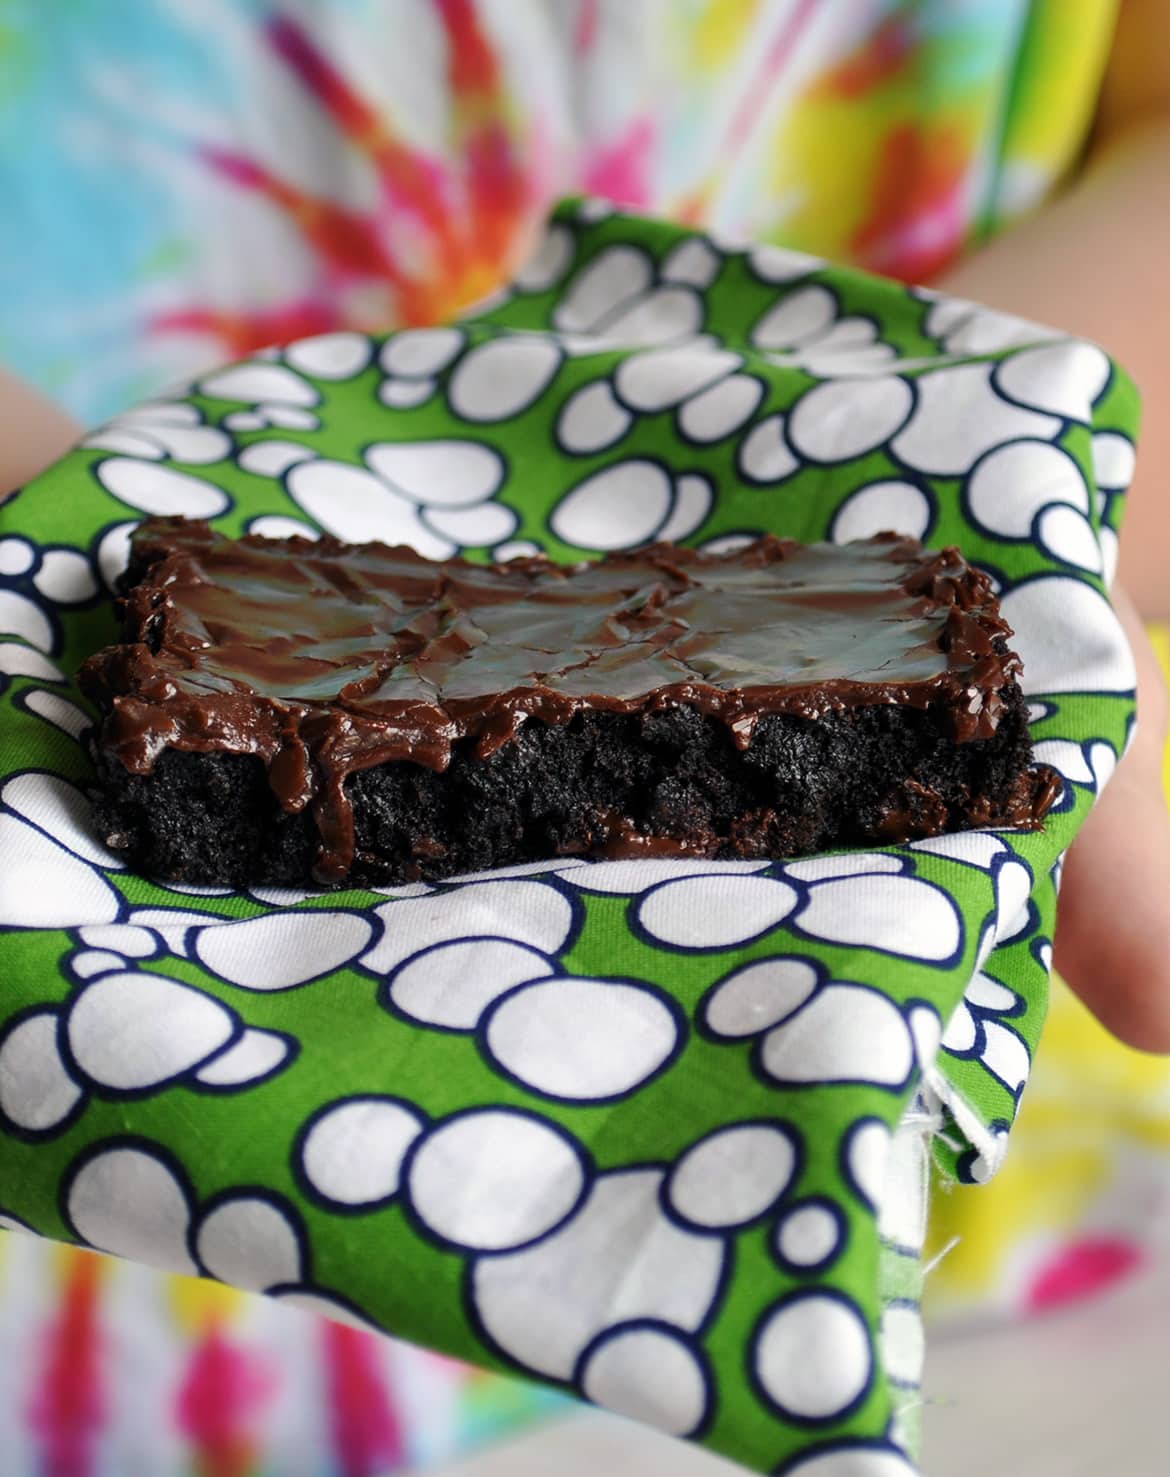 Holding a frosted brownie | Sheet Pan Frosted Brownies for a Crowd